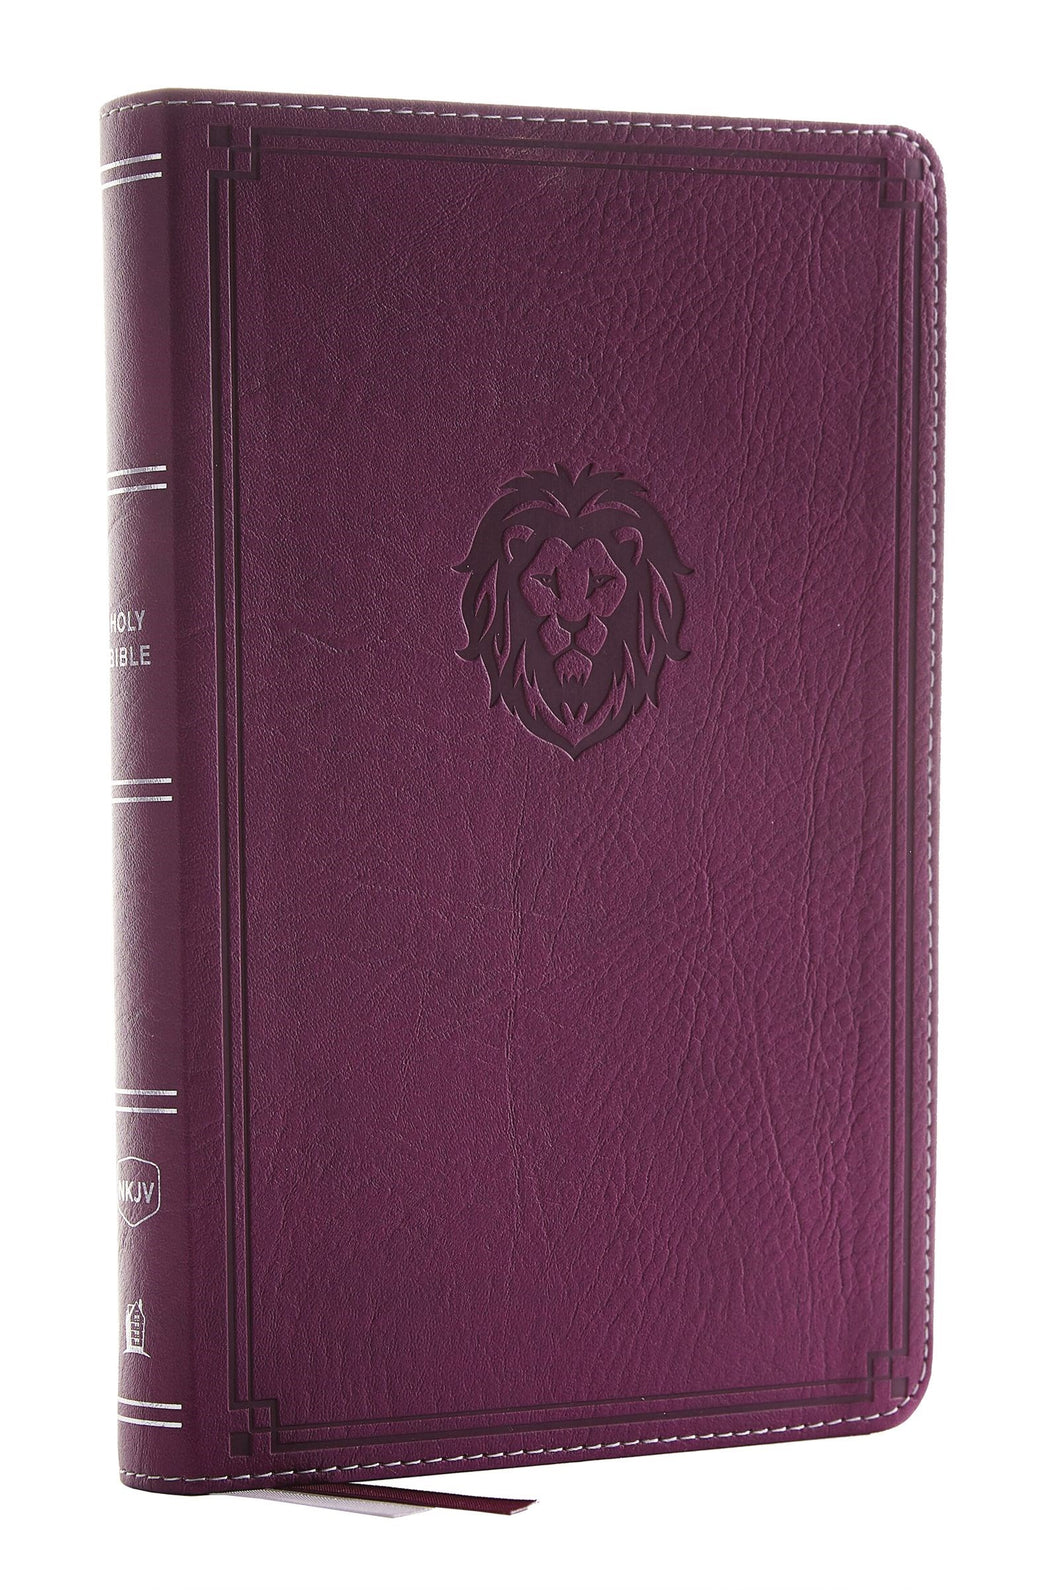 NKJV Thinline Bible/Youth Edition (Comfort Print)-Berry Leathersoft